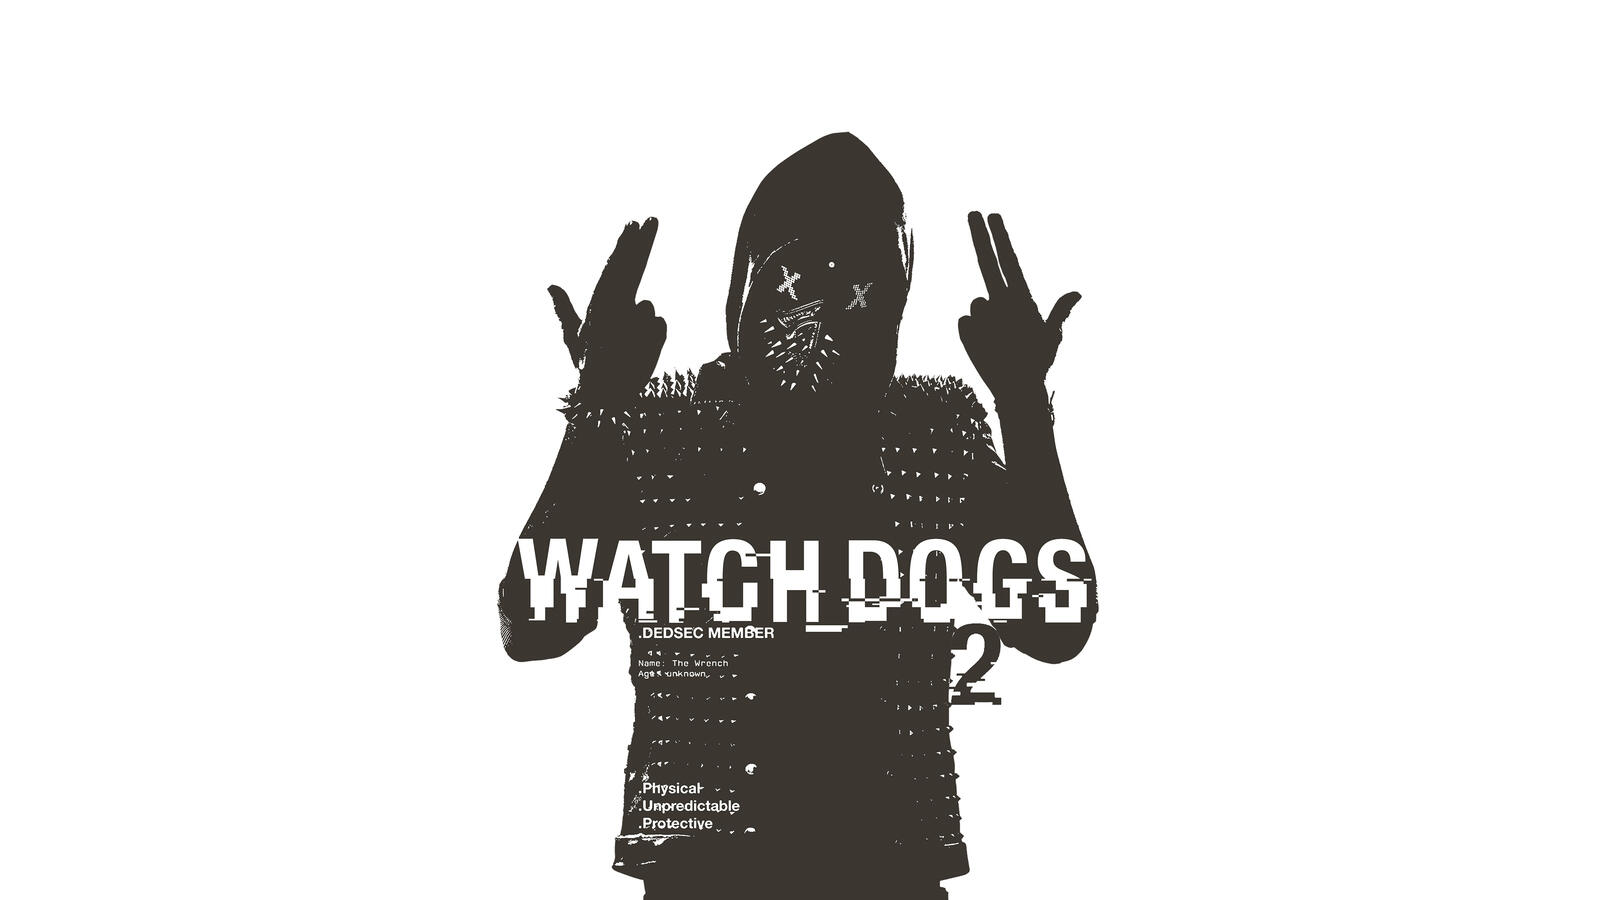 Wallpapers Watch Dogs 2 2016 games wrench watch dogs 2 on the desktop